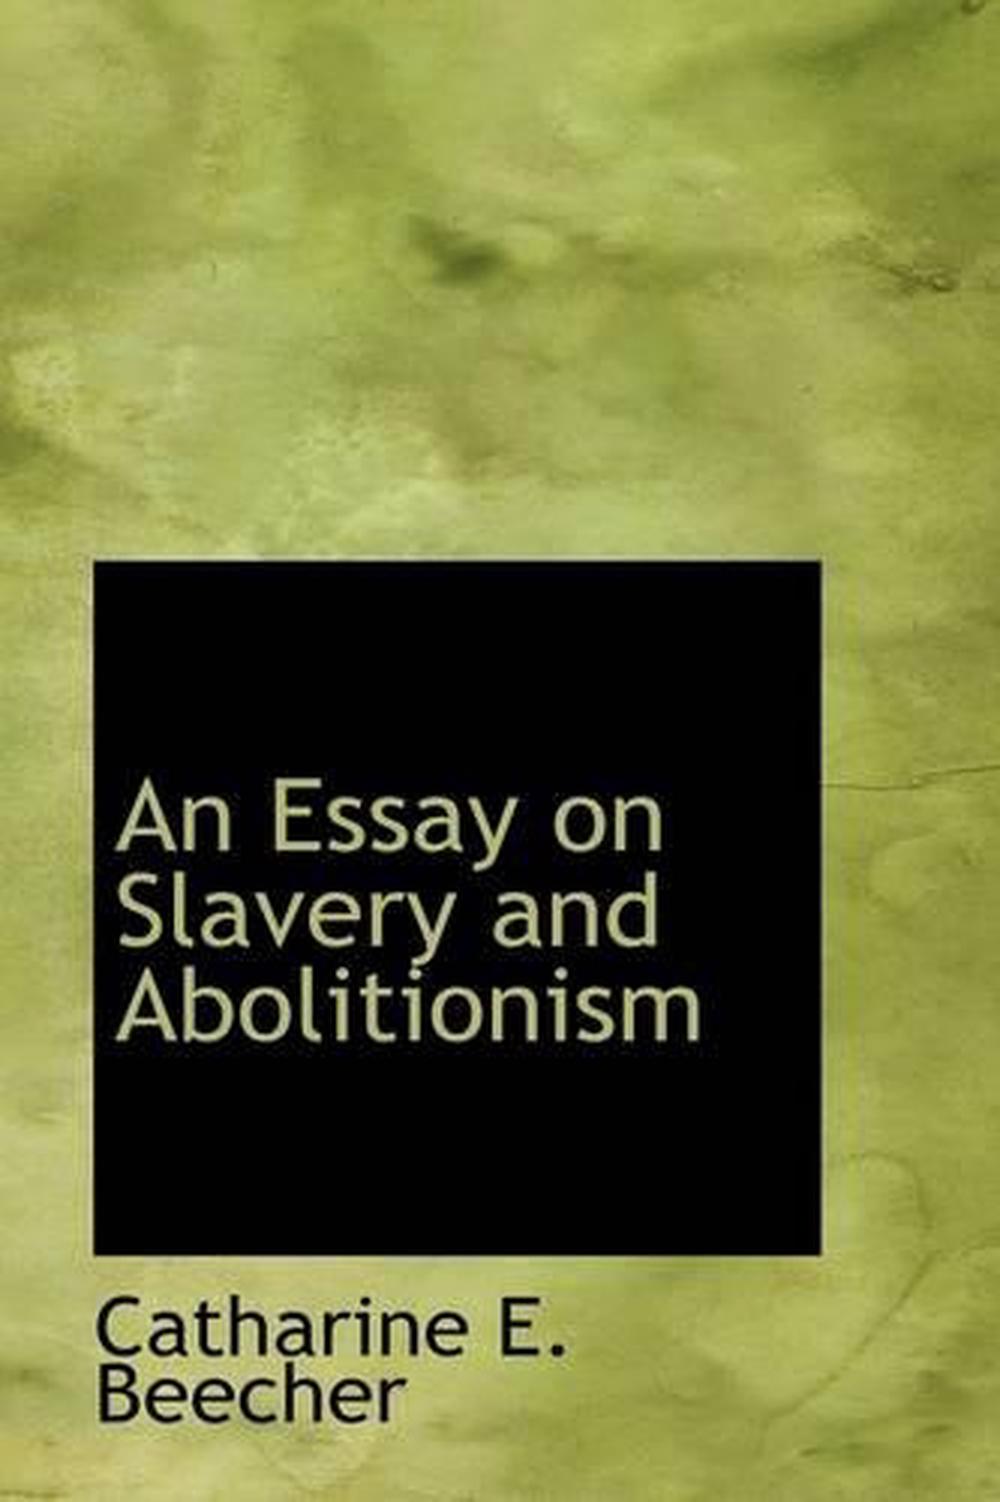 catharine beecher essay on slavery and abolitionism sat